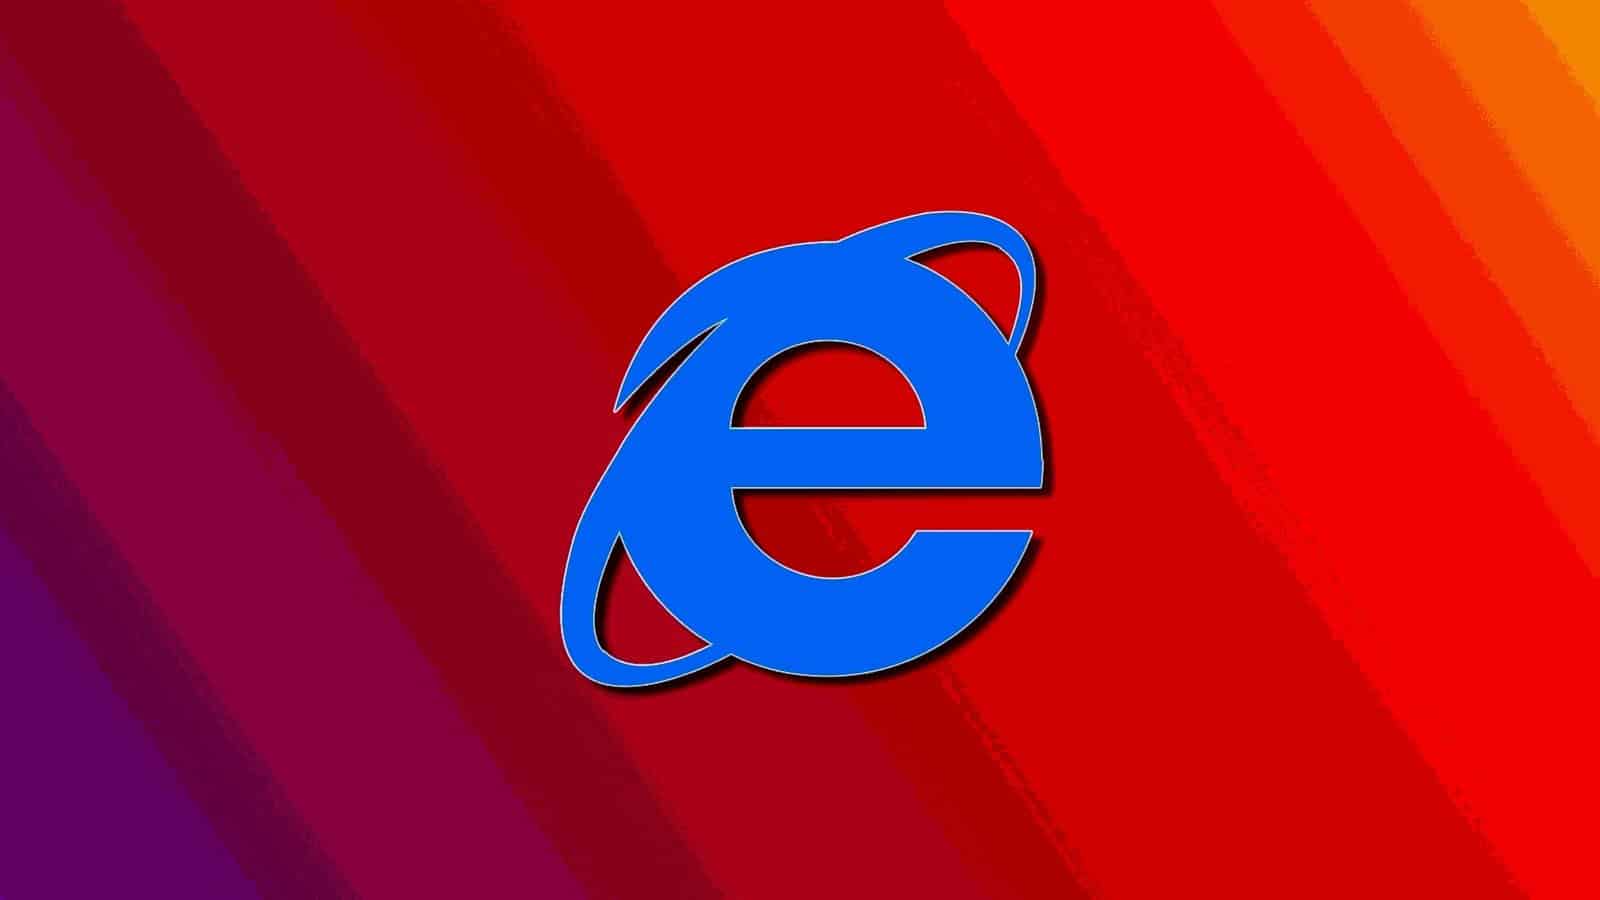 Microsoft: Windows update to permanently disable Internet Explorer